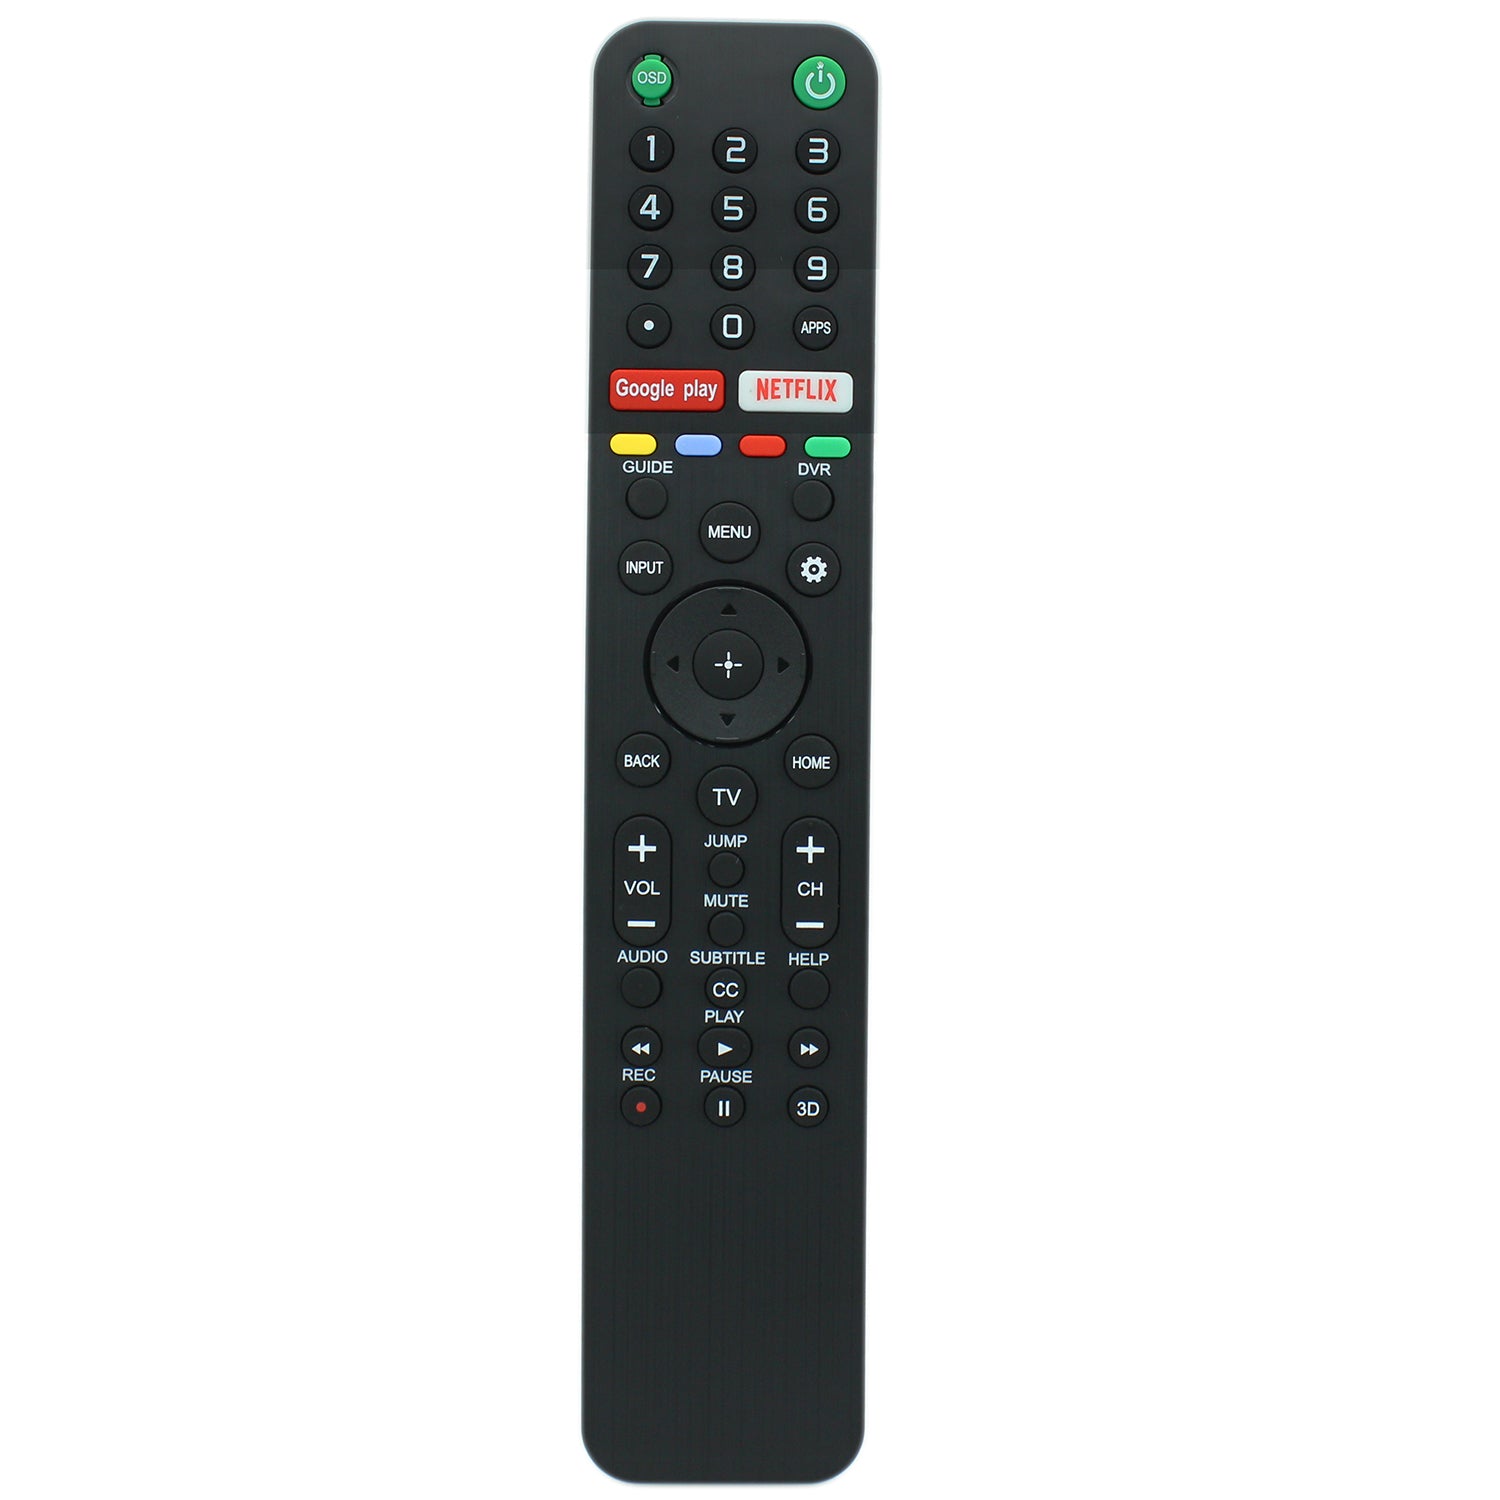 RMF-TX500U IR Remote Replacement for Sony TV XBR-65X950G